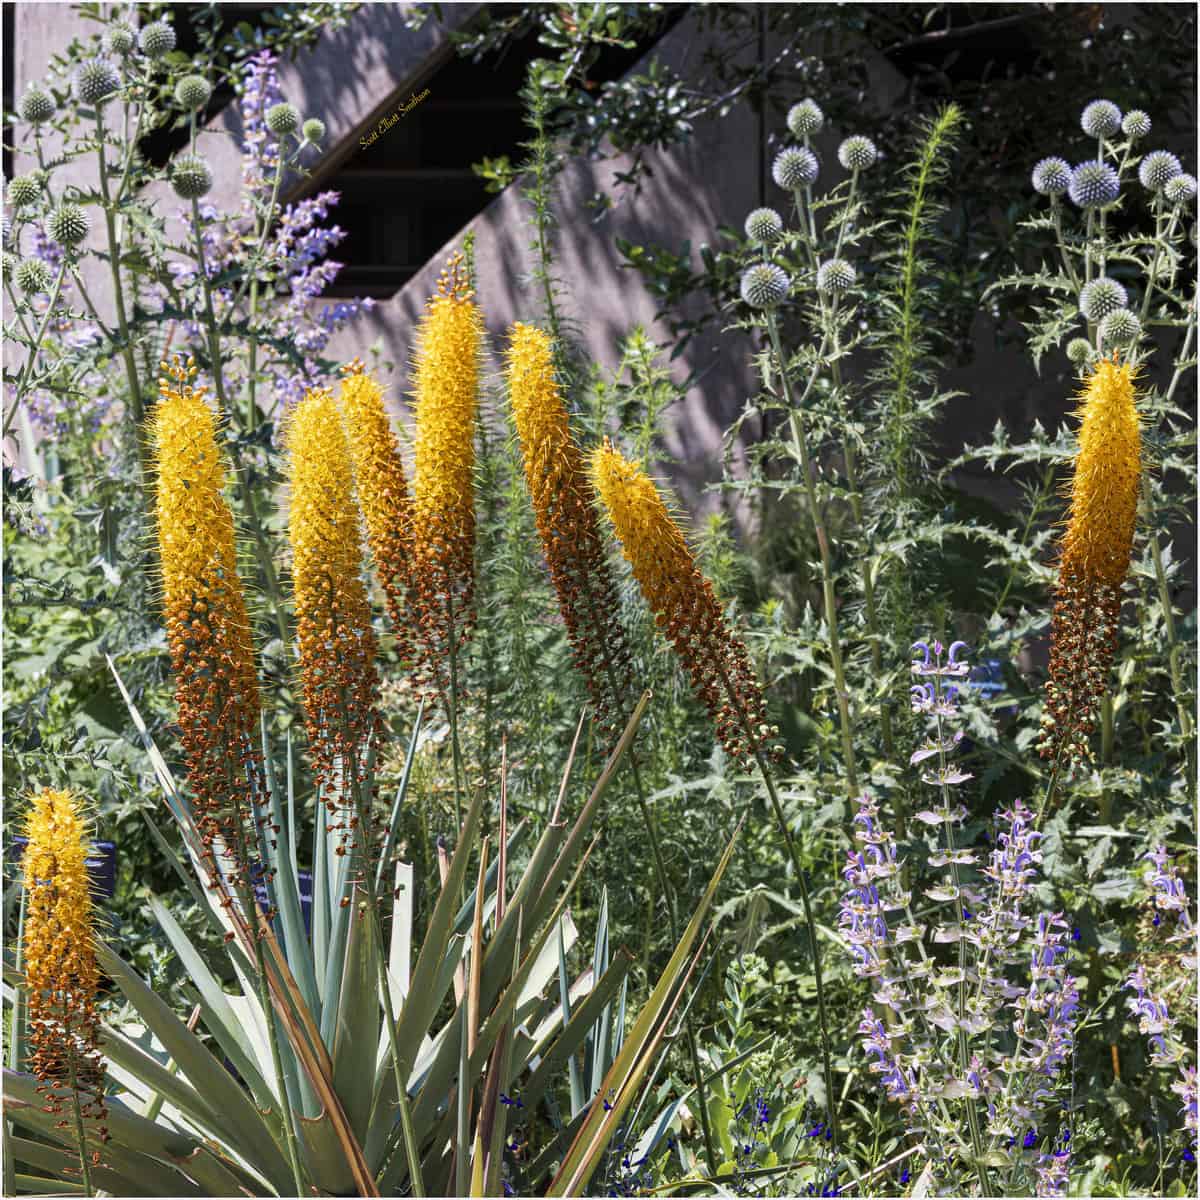 eremurus - foxtail lily with purple plants in a dry garden. Lavender wall